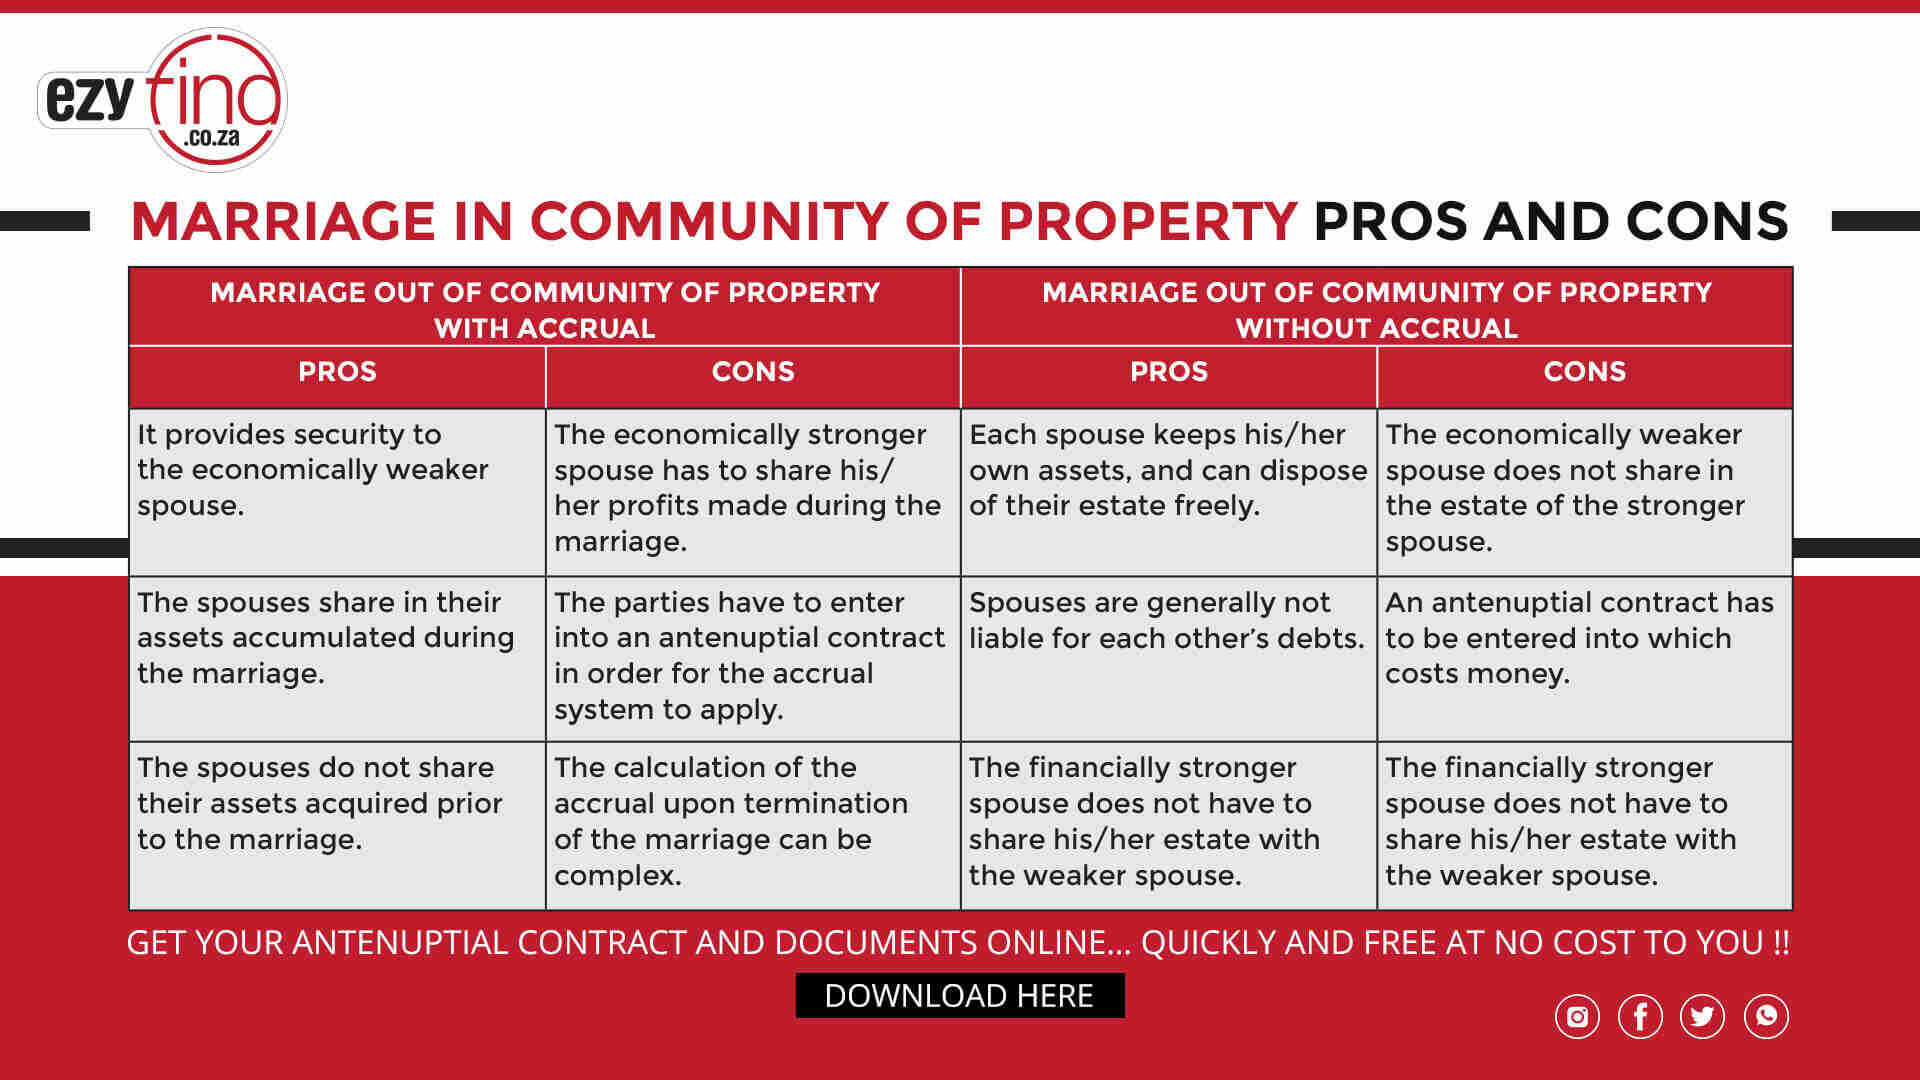 Marriage out of community of property with accrual at no cost (FREE Download)